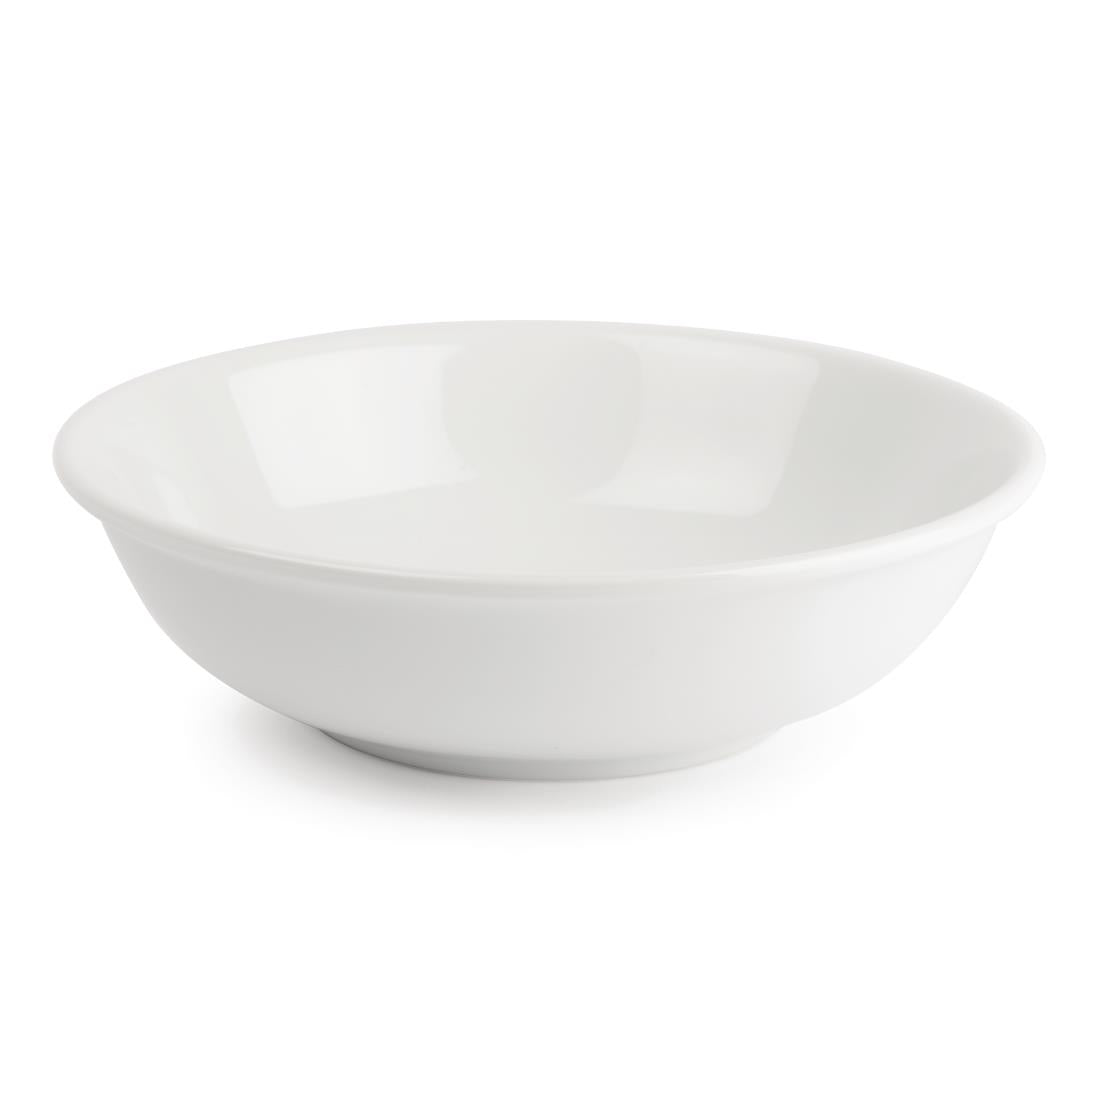 CG055 Royal Porcelain Classic White Cereal Bowls 140mm (Pack of 12)